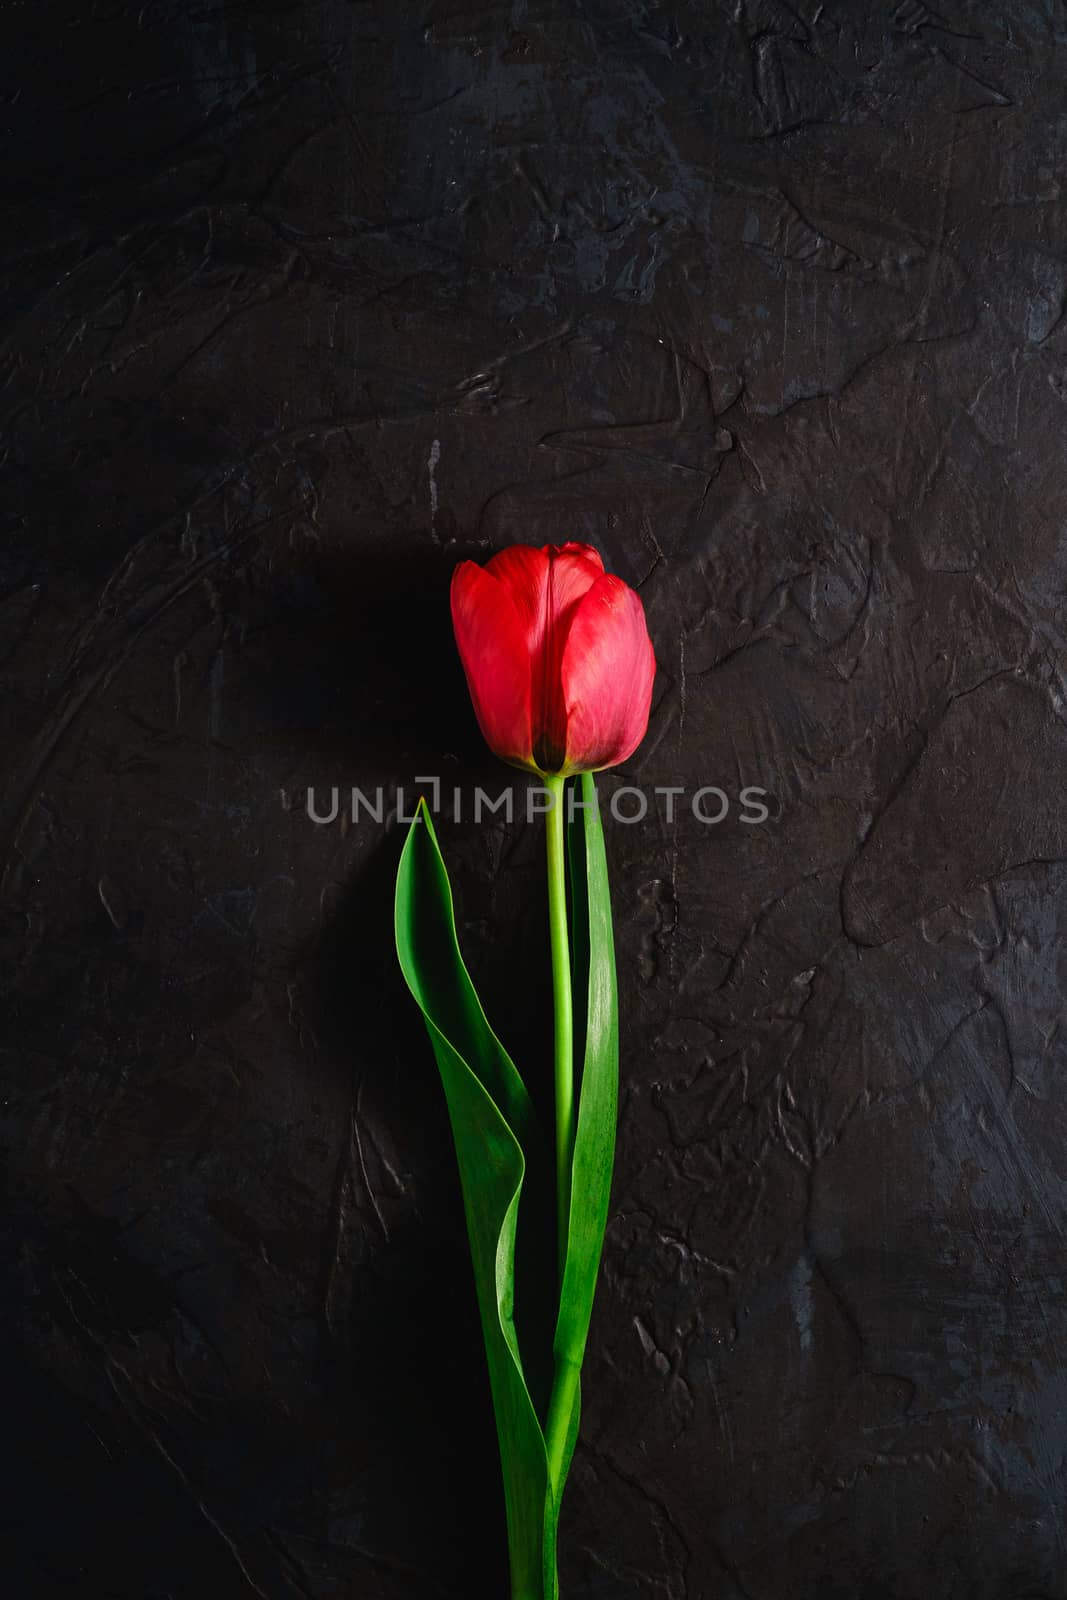 Single red tulip flower on textured black background, top view copy space